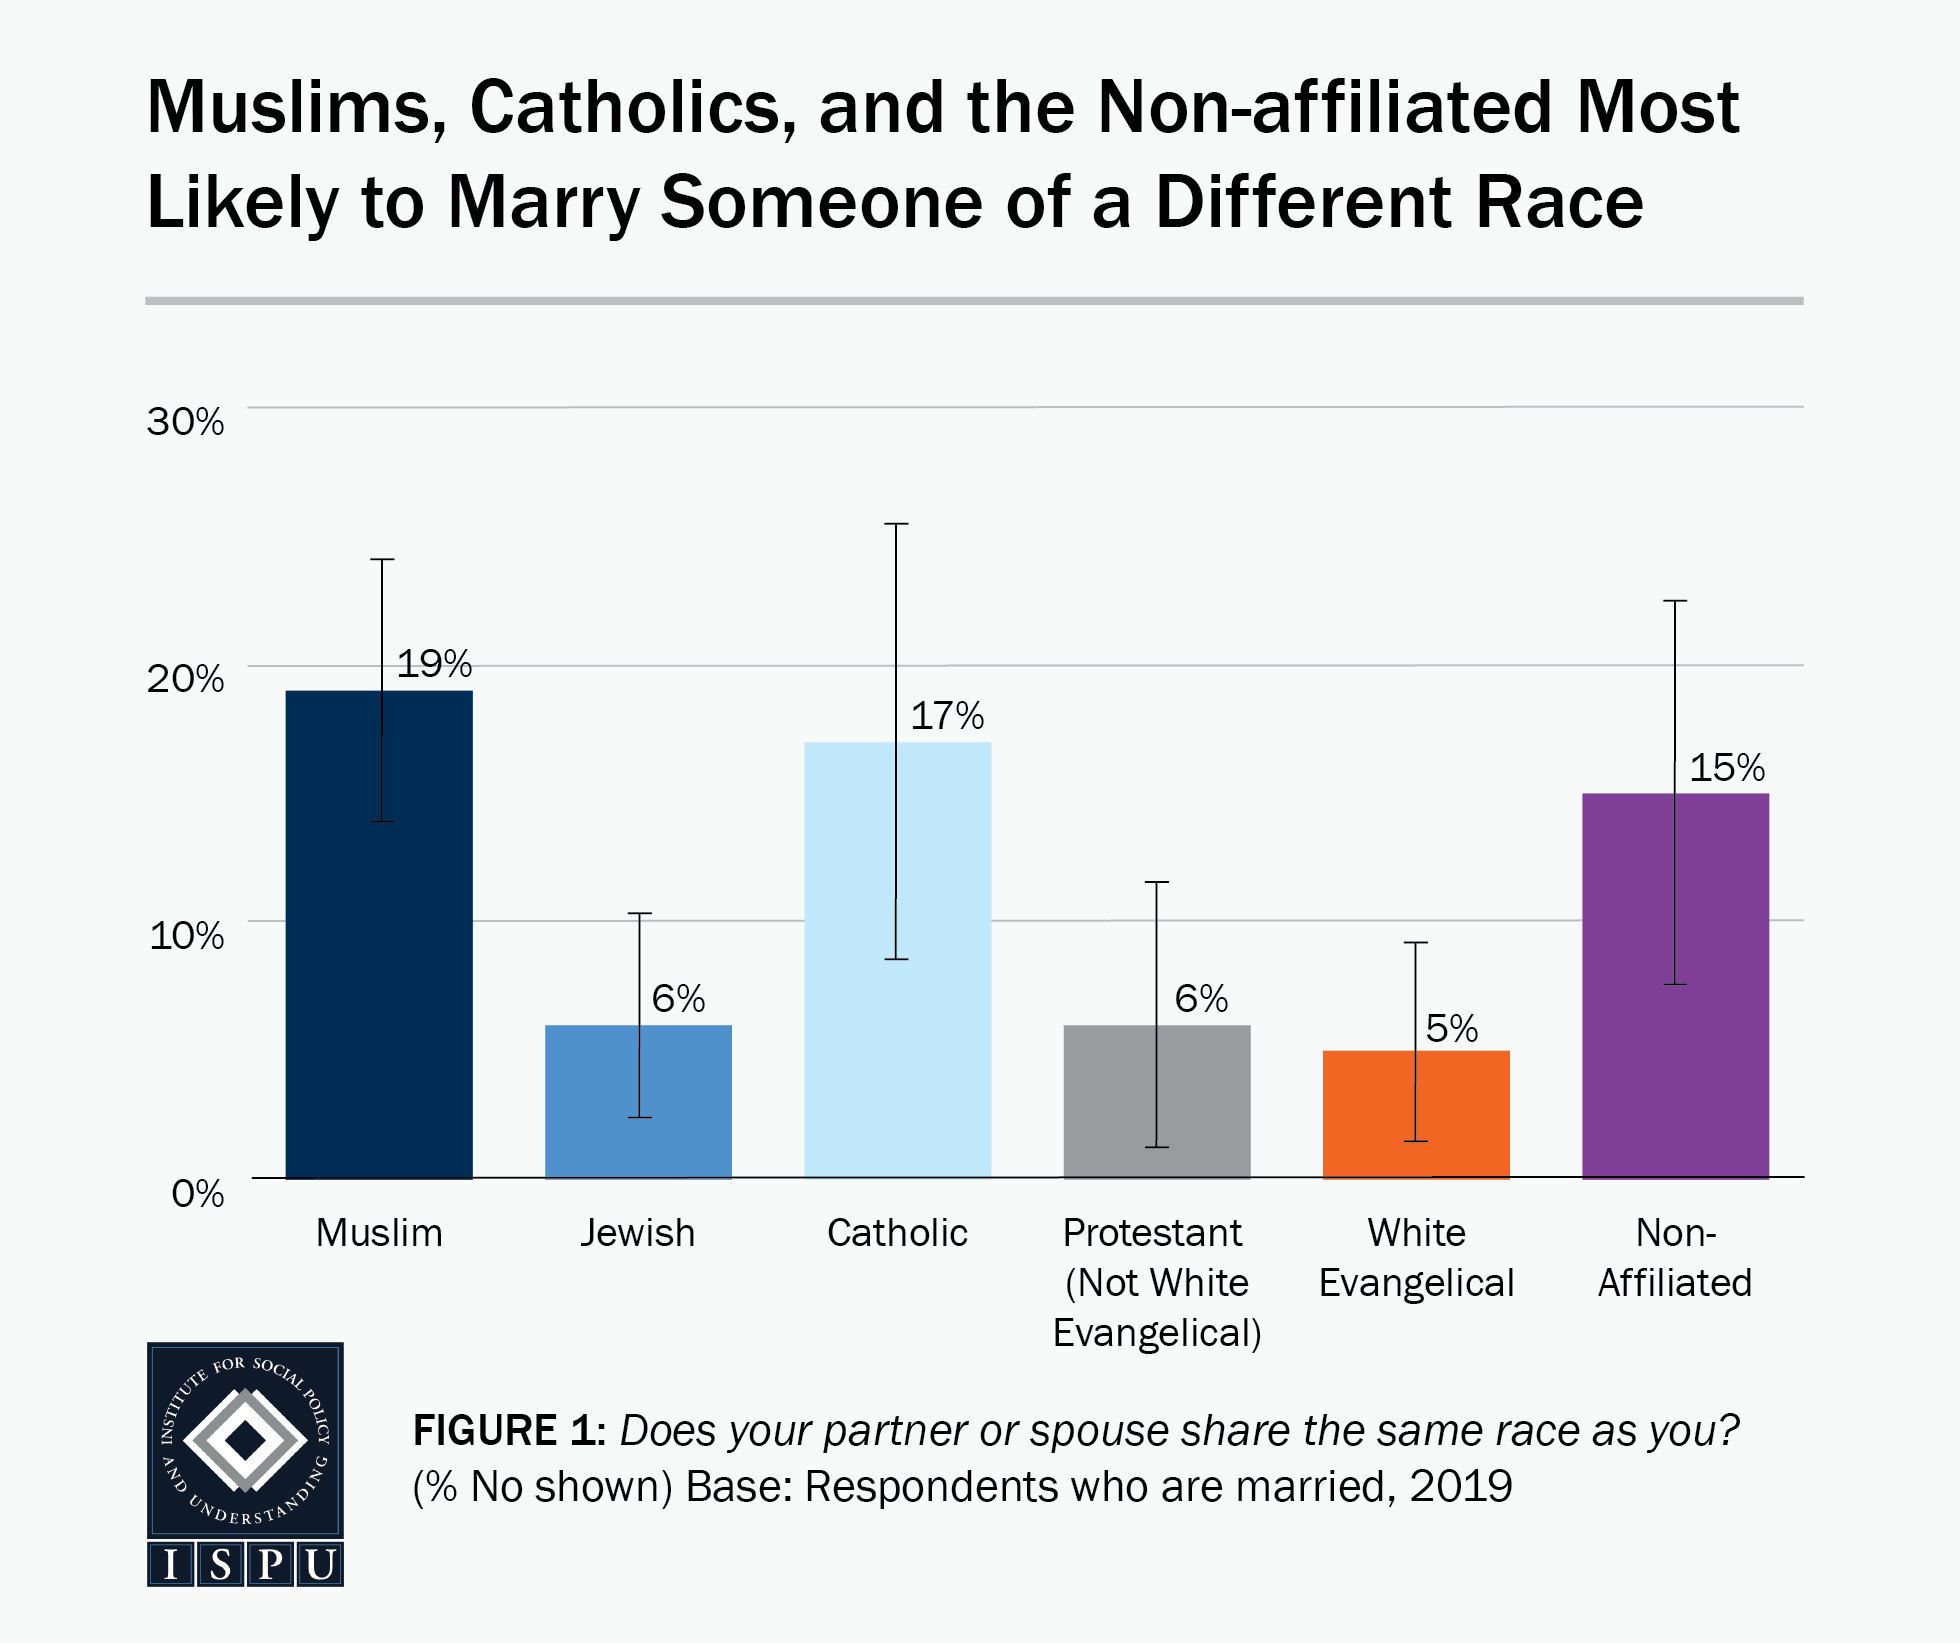 Figure 1: A bar graph showing that Muslims (19%), Catholics (17%), and the nonaffiliated (15%) are the most likely faith groups to marry someone of a different race